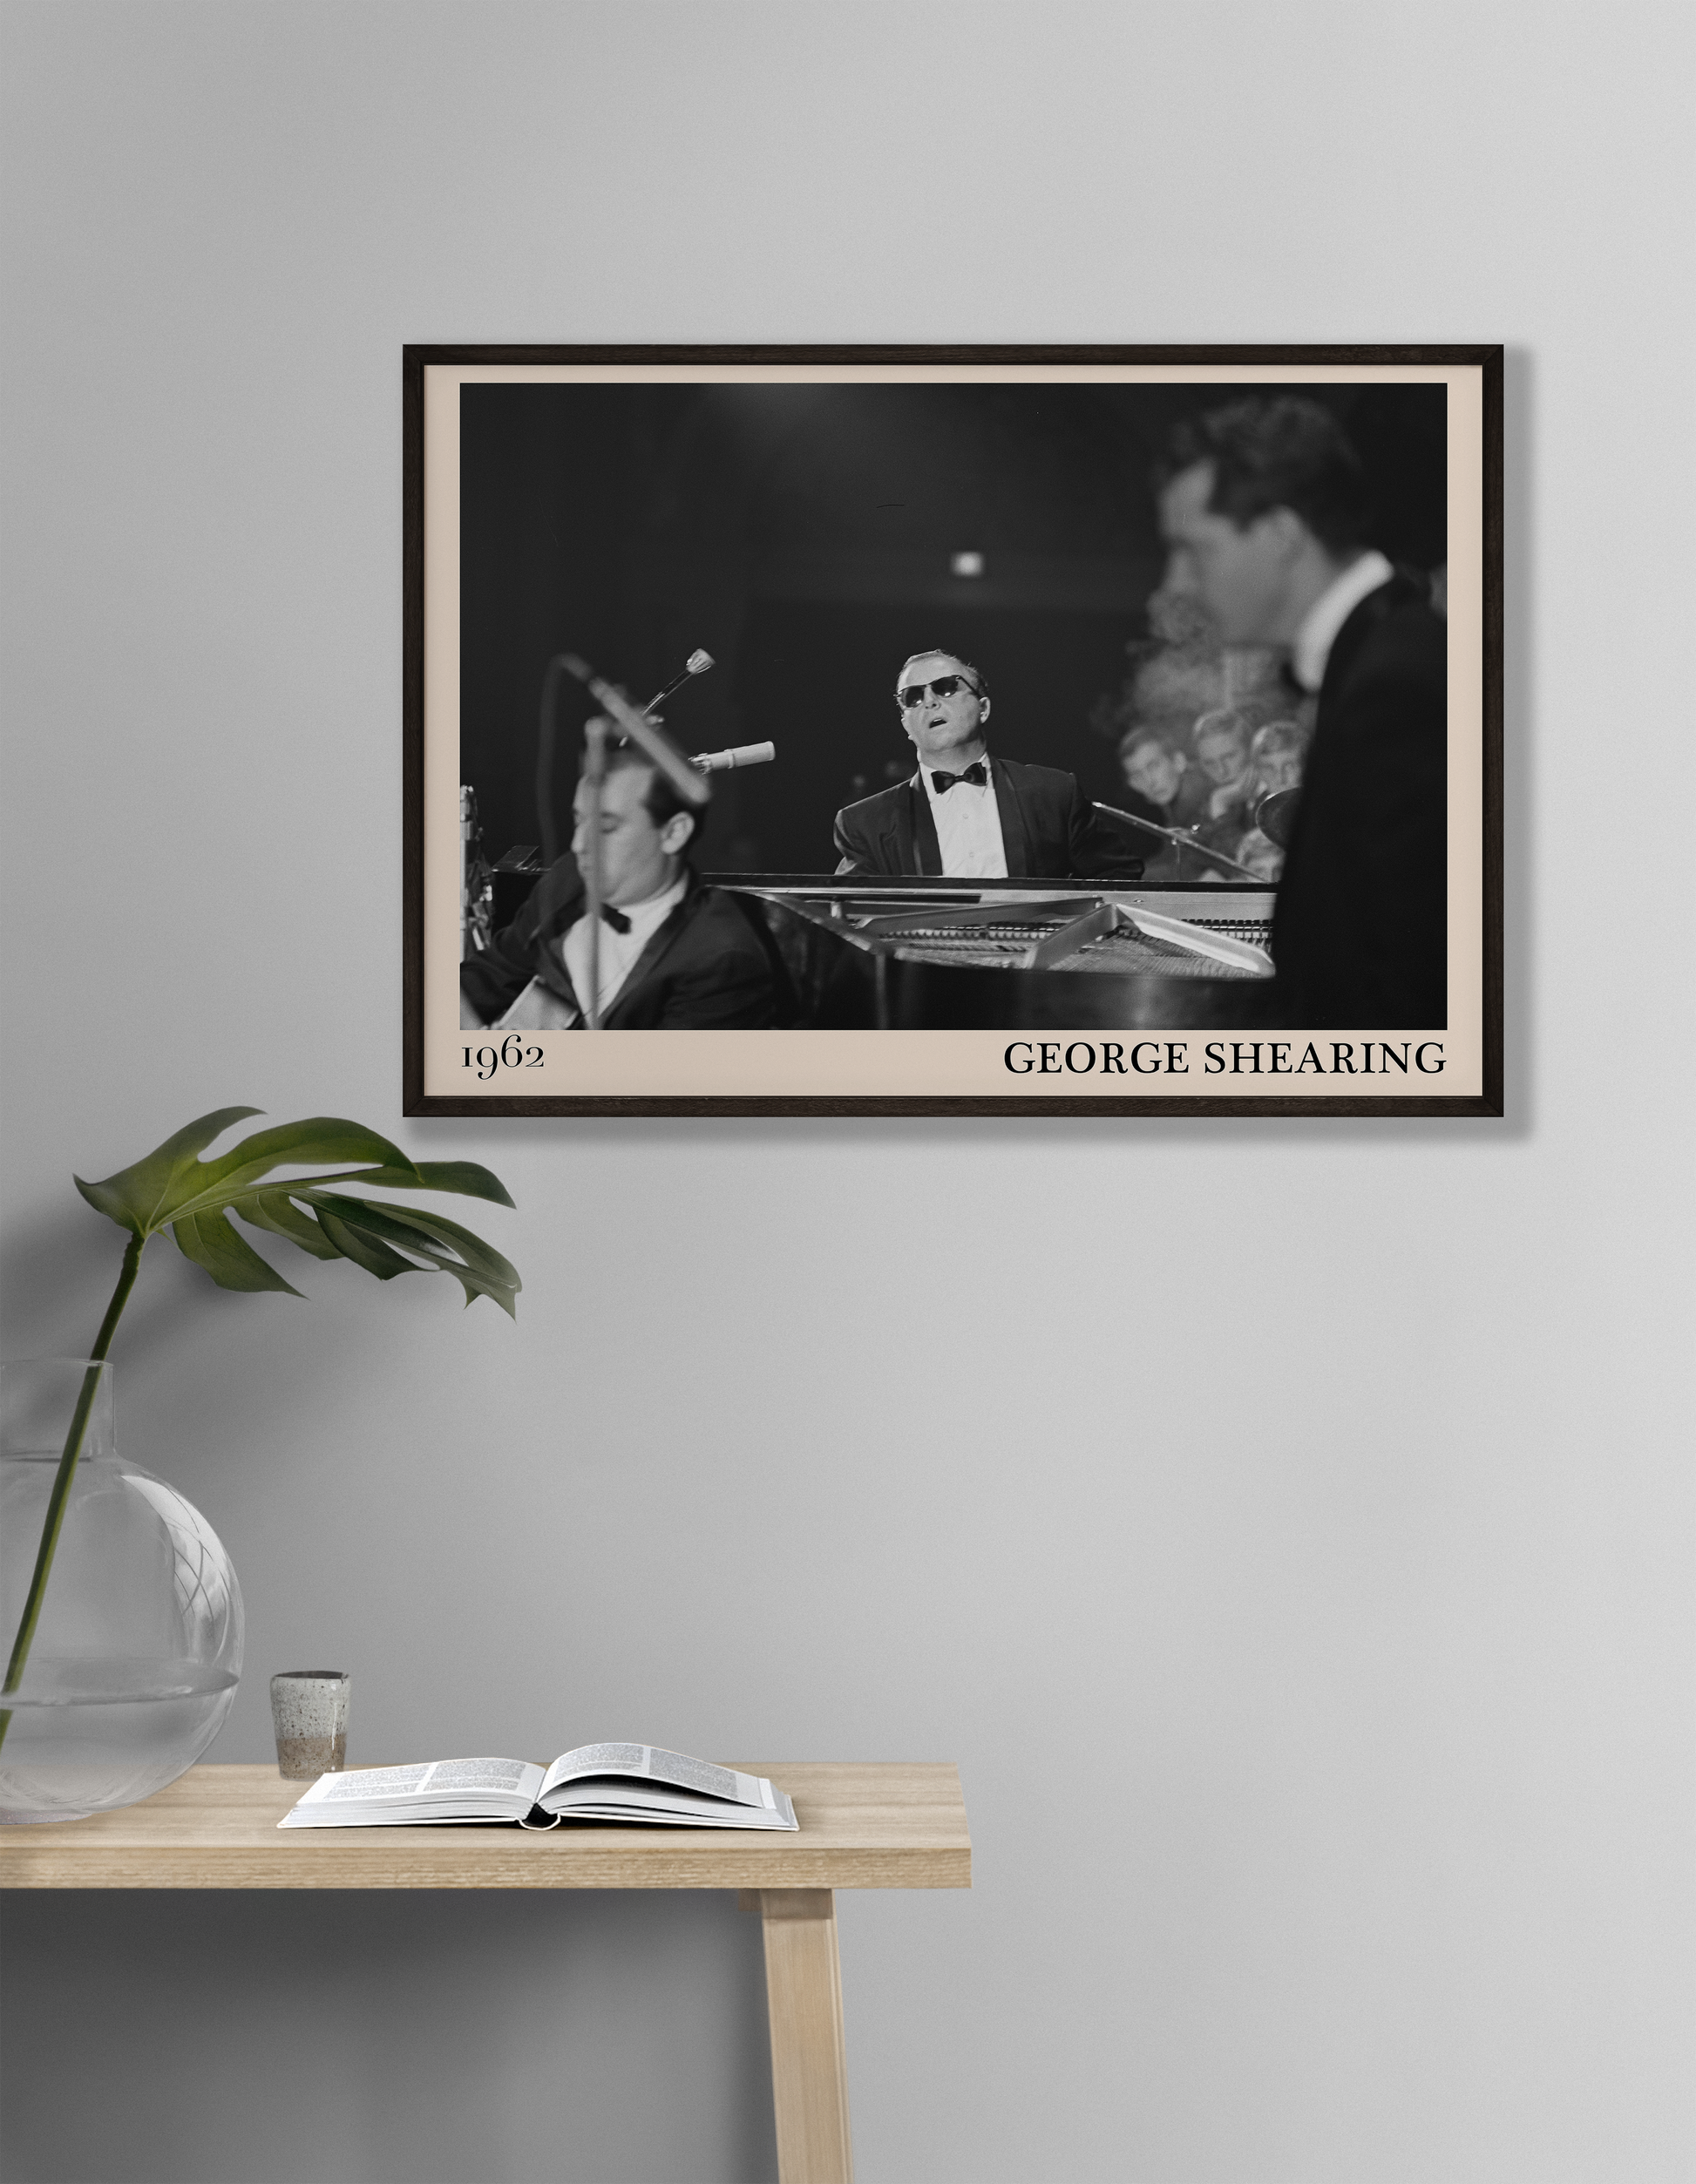 1962 picture of George Shearing playing piano. Picture crafted into a cool black framed jazz print, with an off-white border. Poster is hanging on a grey living room wall